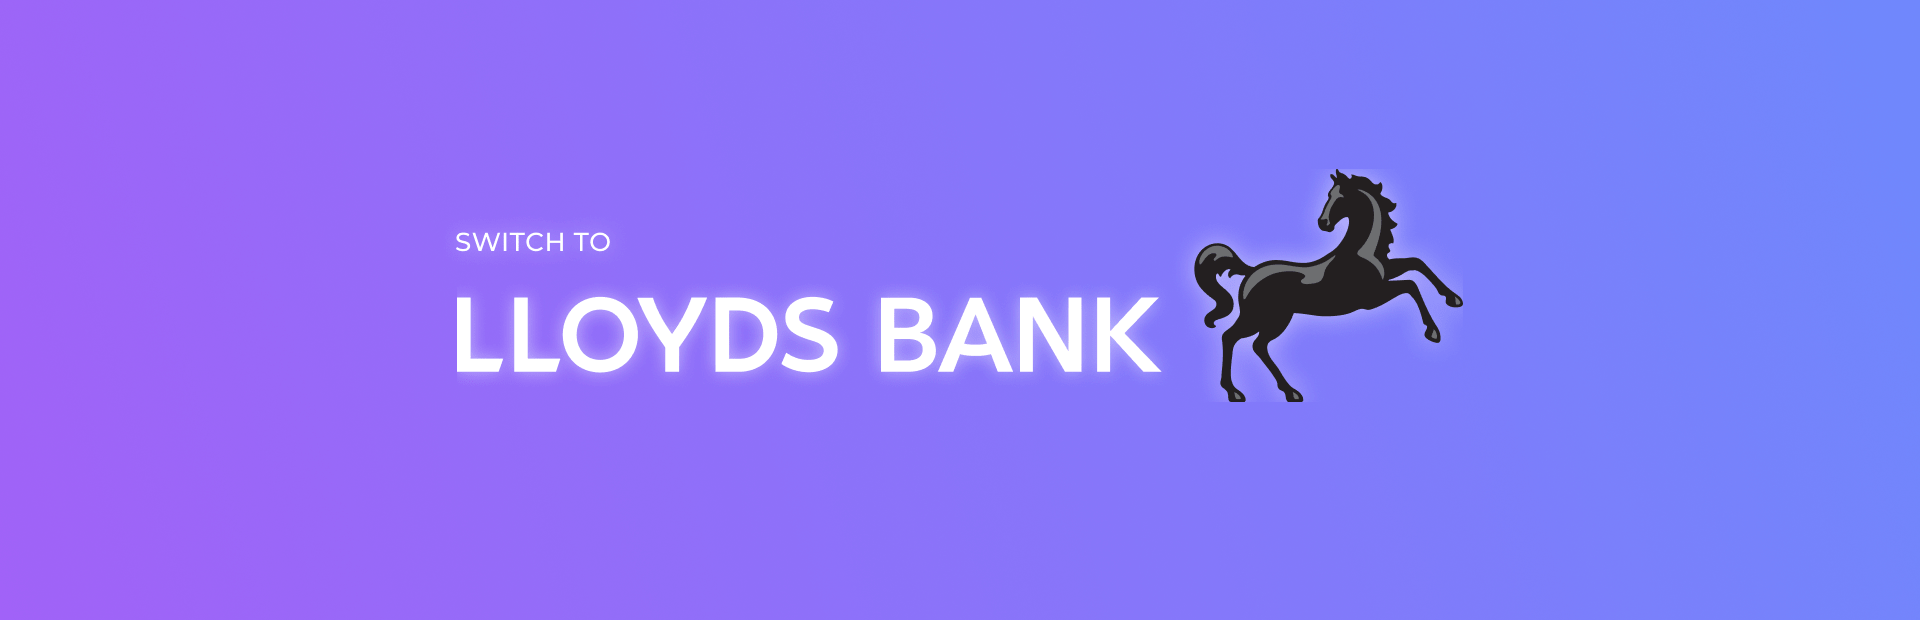 Lloyds Bank Switch Offer Get £175 for Switching